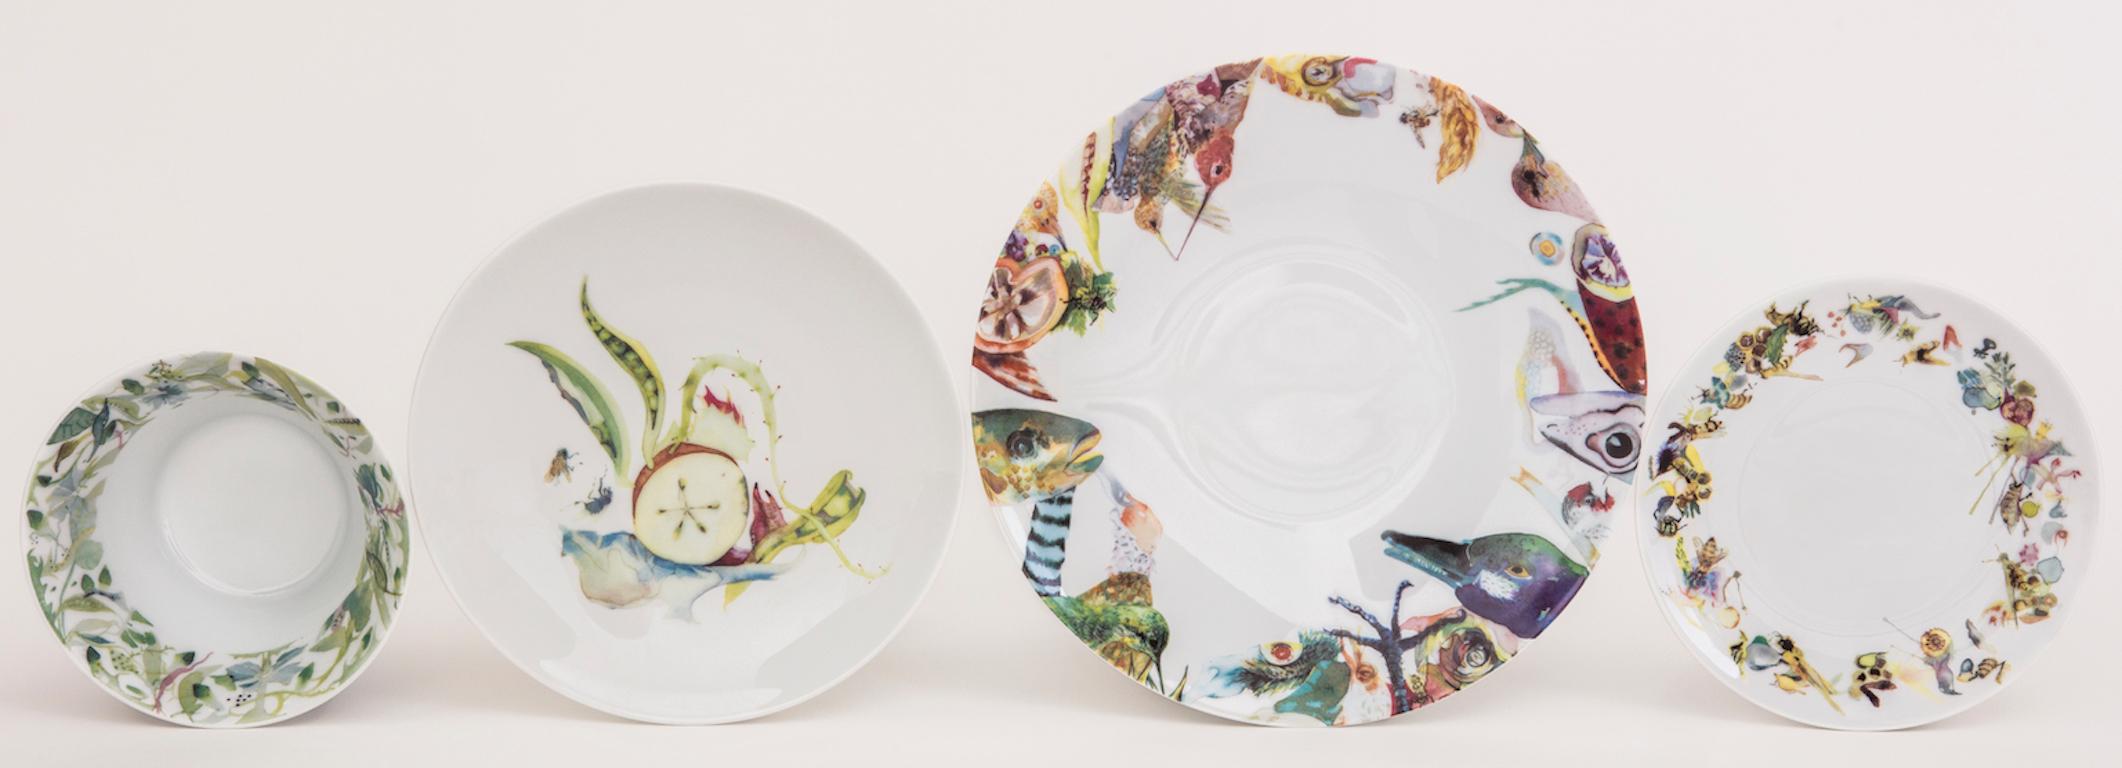 Contemporary Multicolored French Limoges 4-Piece Porcelain Dinner Setting, Plates and Bowl For Sale